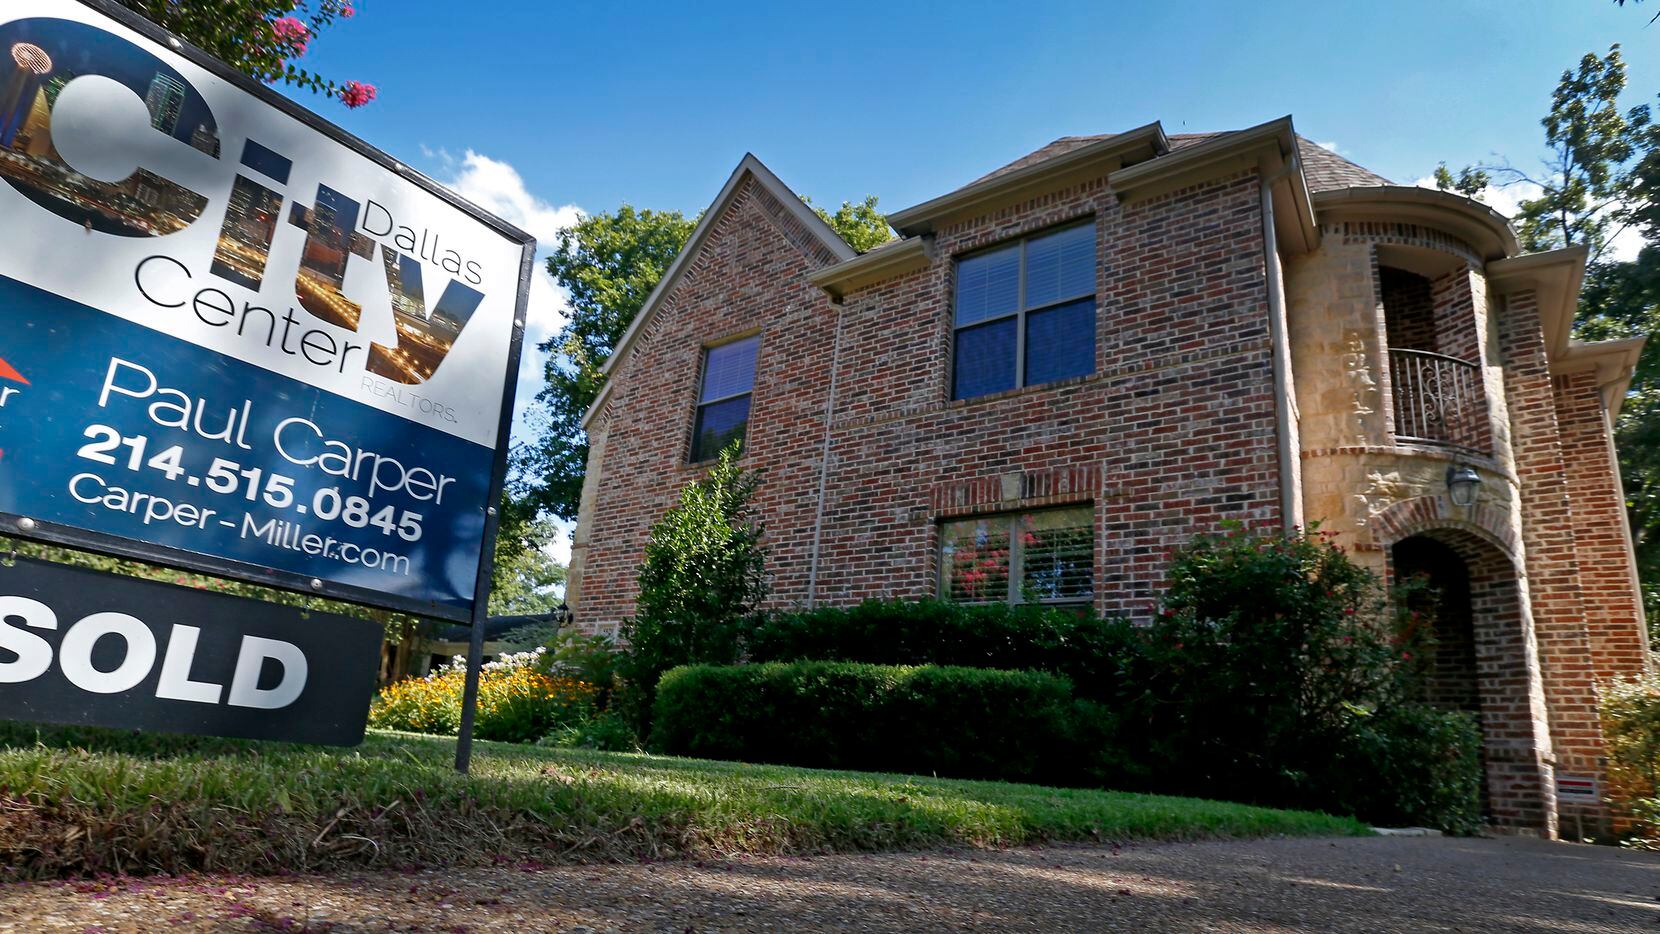 Dallas-Fort Worth home sales were up 7% in July from a year ago with the largest gain in...